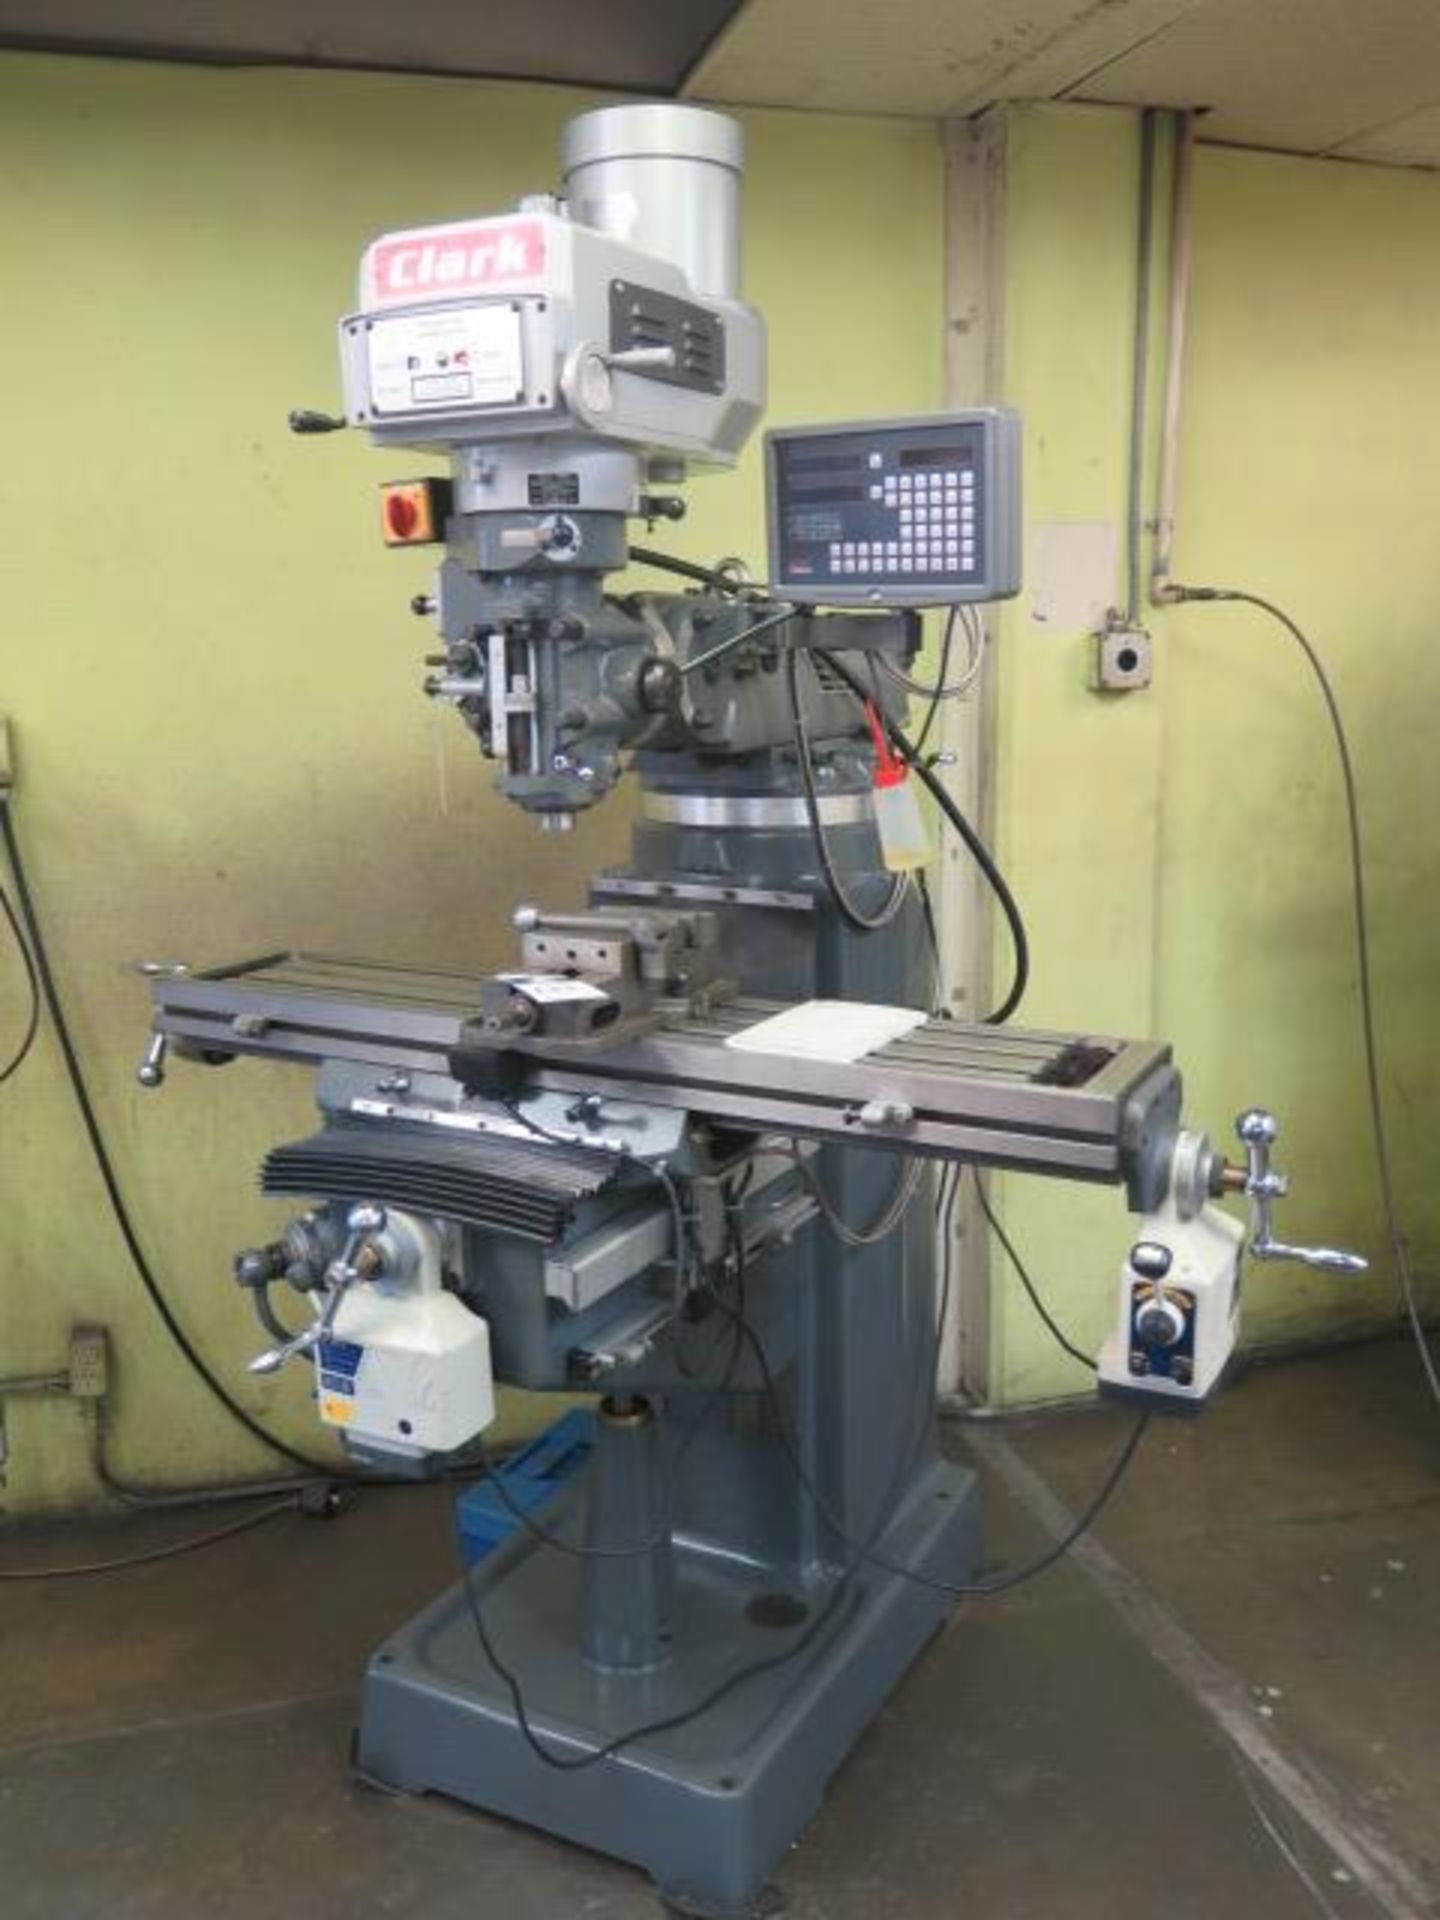 2015 Clark B3V Vertical Mill s/n 150237 w/ Sino SDS6-2V Programmable DRO, 3Hp Motor, SOLD AS IS - Image 2 of 9